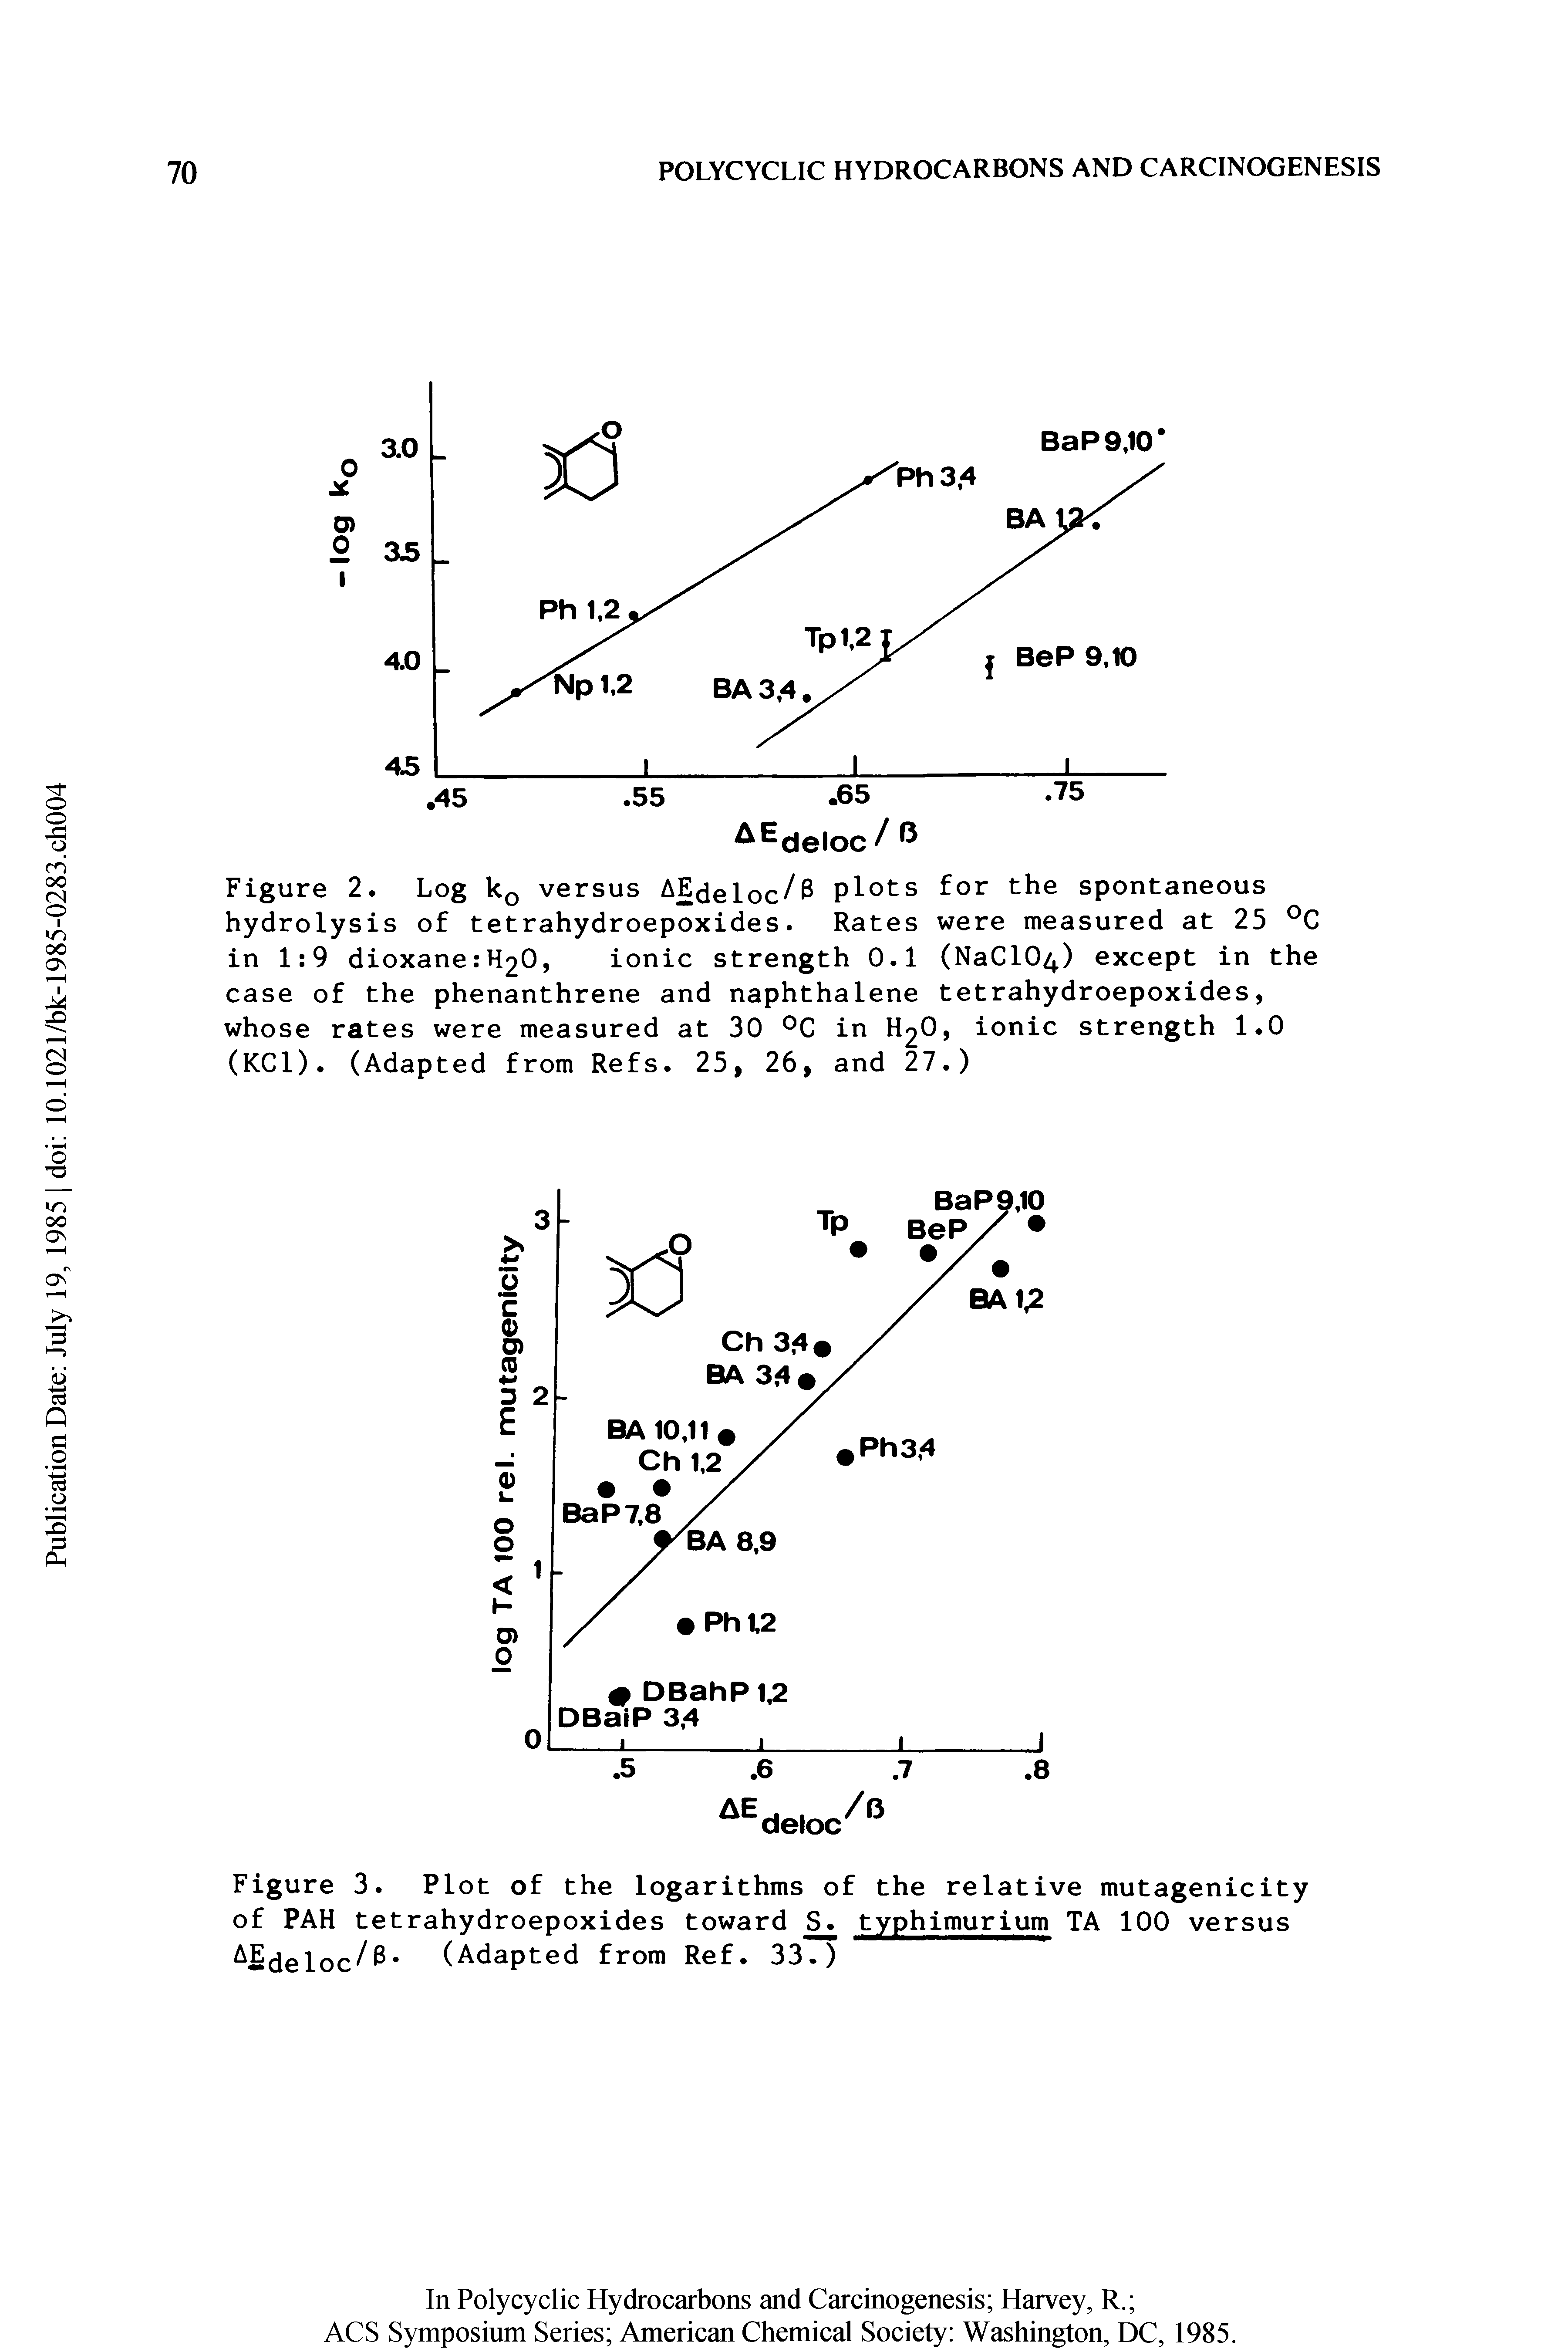 Figure 2. Log kQ versus AEdeioc/3 plots for the spontaneous hydrolysis of tetrahydroepoxides. Rates were measured at 25 °C in 1 9 dioxane.-t O, ionic strength 0.1 (NaC104) except in the case of the phenanthrene and naphthalene tetrahydroepoxides, whose rates were measured at 30 °C in 1 0, ionic strength 1.0 (KC1). (Adapted from Refs. 25, 26, and 27.)...